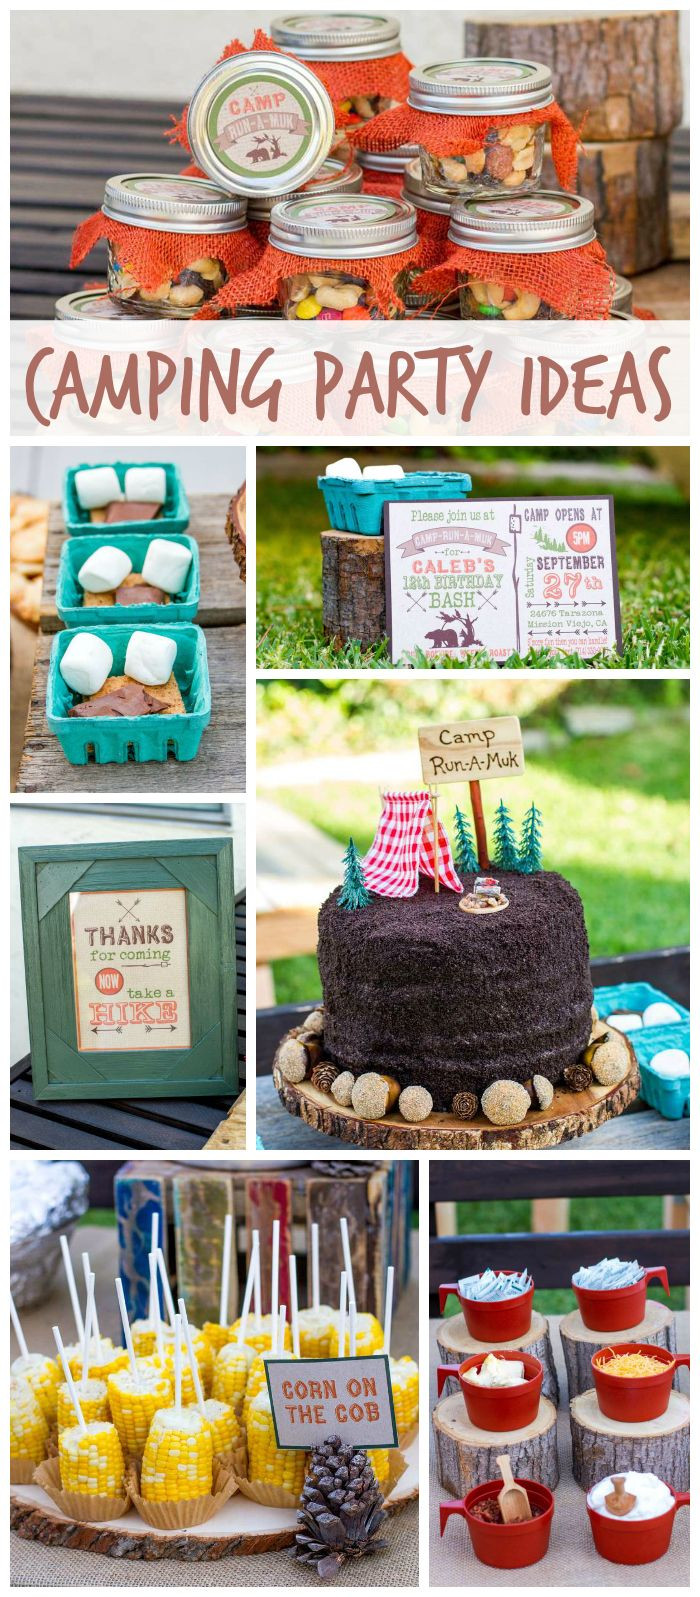 Backyard Birthday Party Ideas 4 Year Old
 A backyard camping boy birthday party with fun foods s